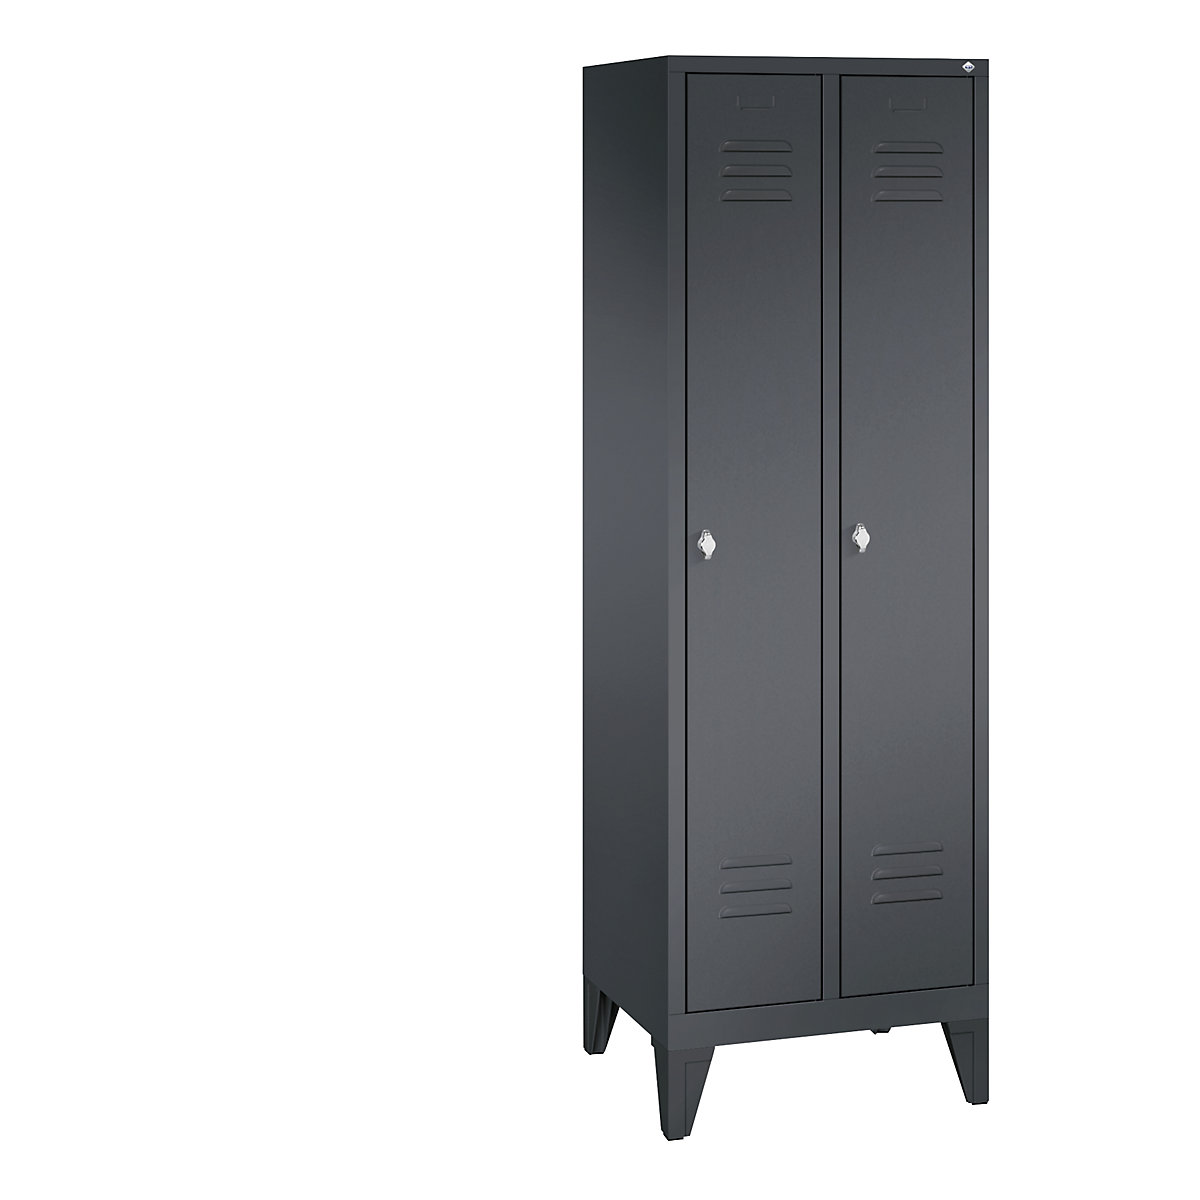 CLASSIC cloakroom locker with feet – C+P, 2 compartments, compartment width 300 mm, black grey-7